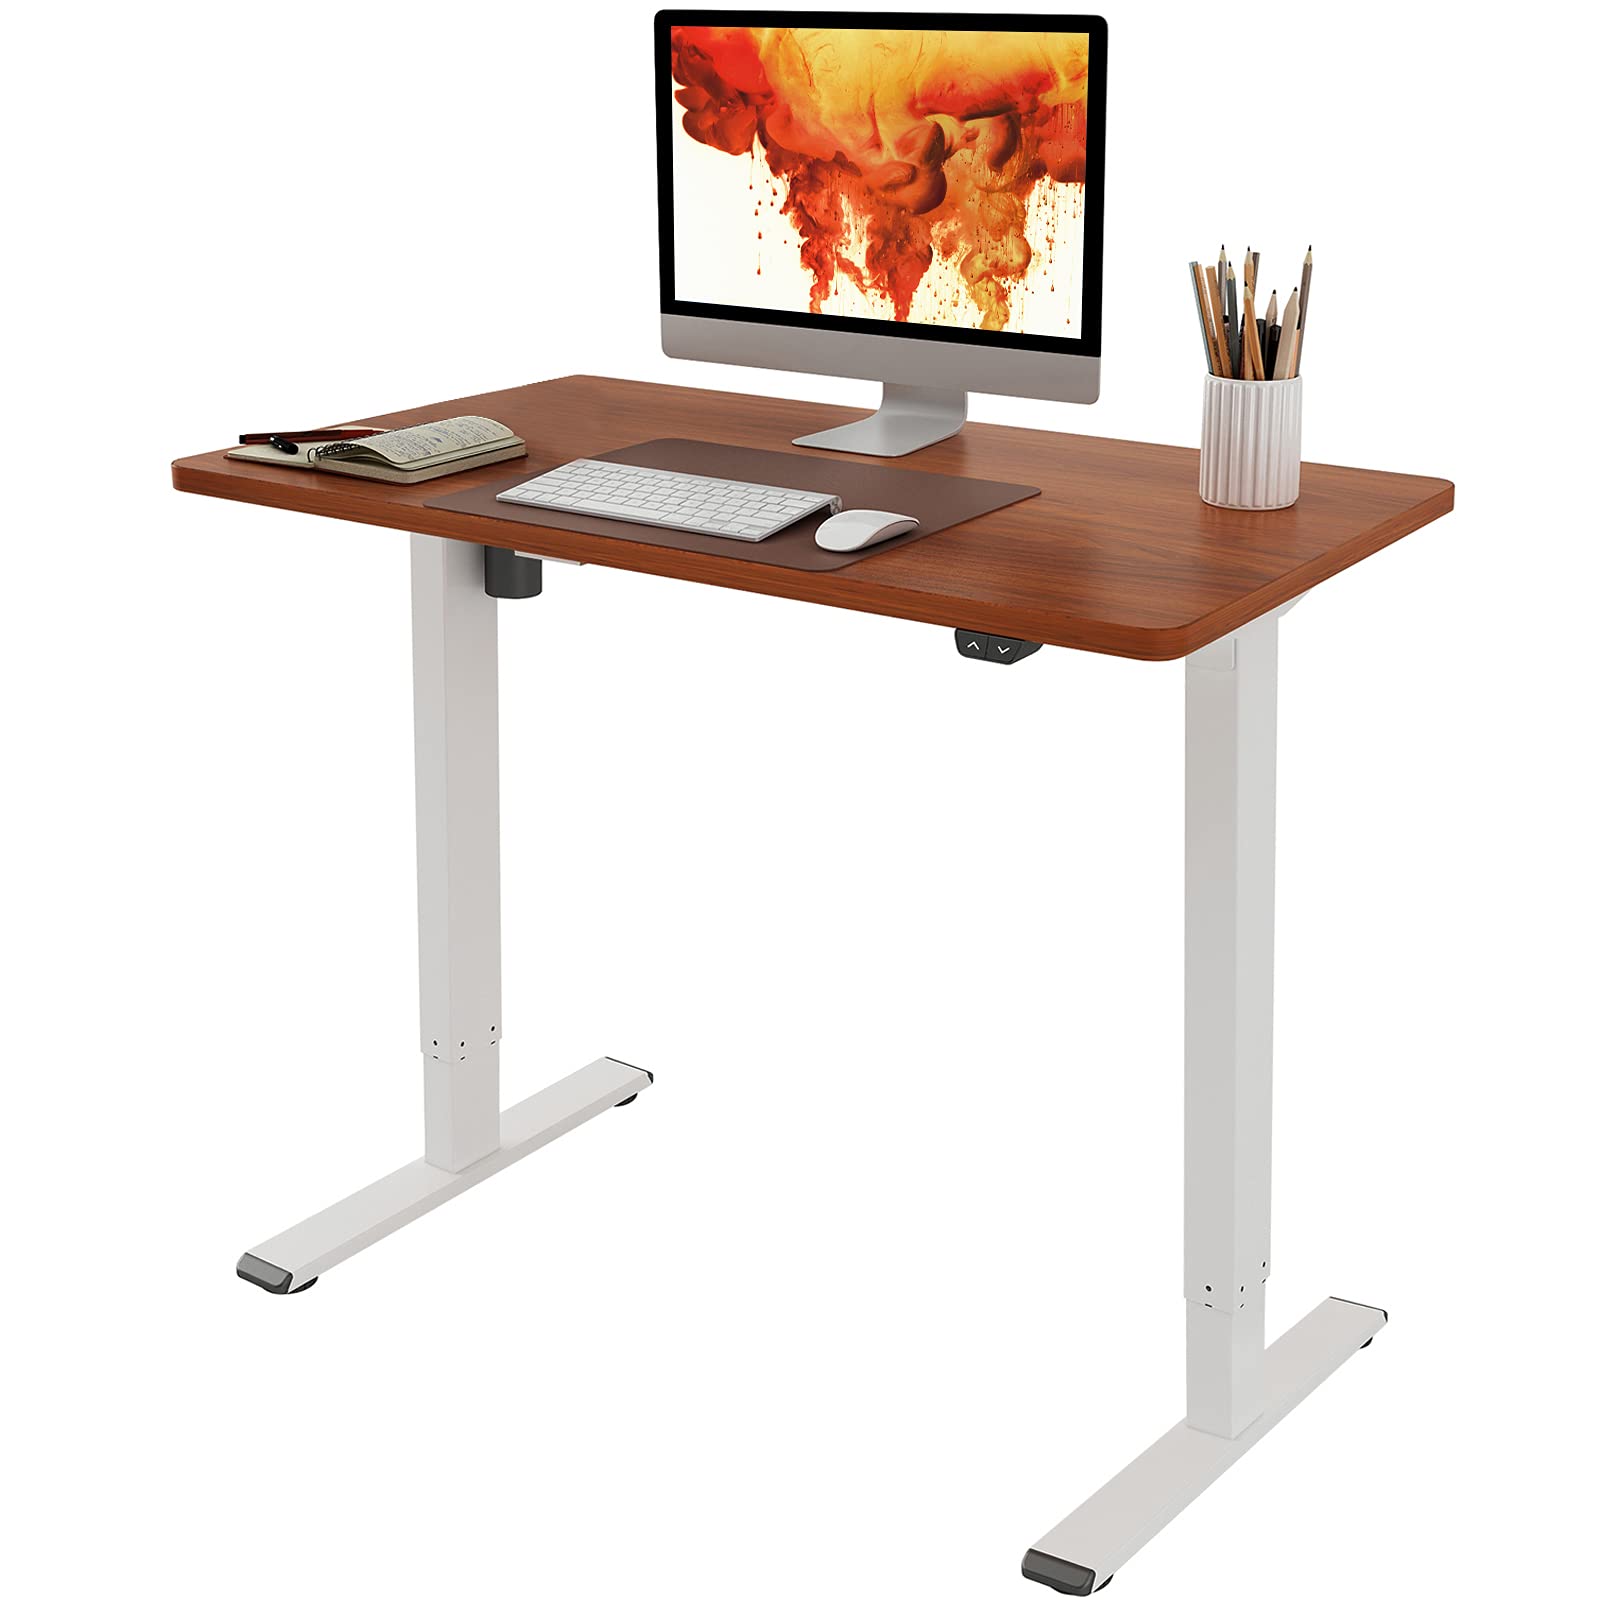 Flexispot EC1 Adjustable Height Desk 42 x 24 Inches Small Desk for Small Space Electric Sit Stand Home Office Table Standing Desk Classic (White Fr...